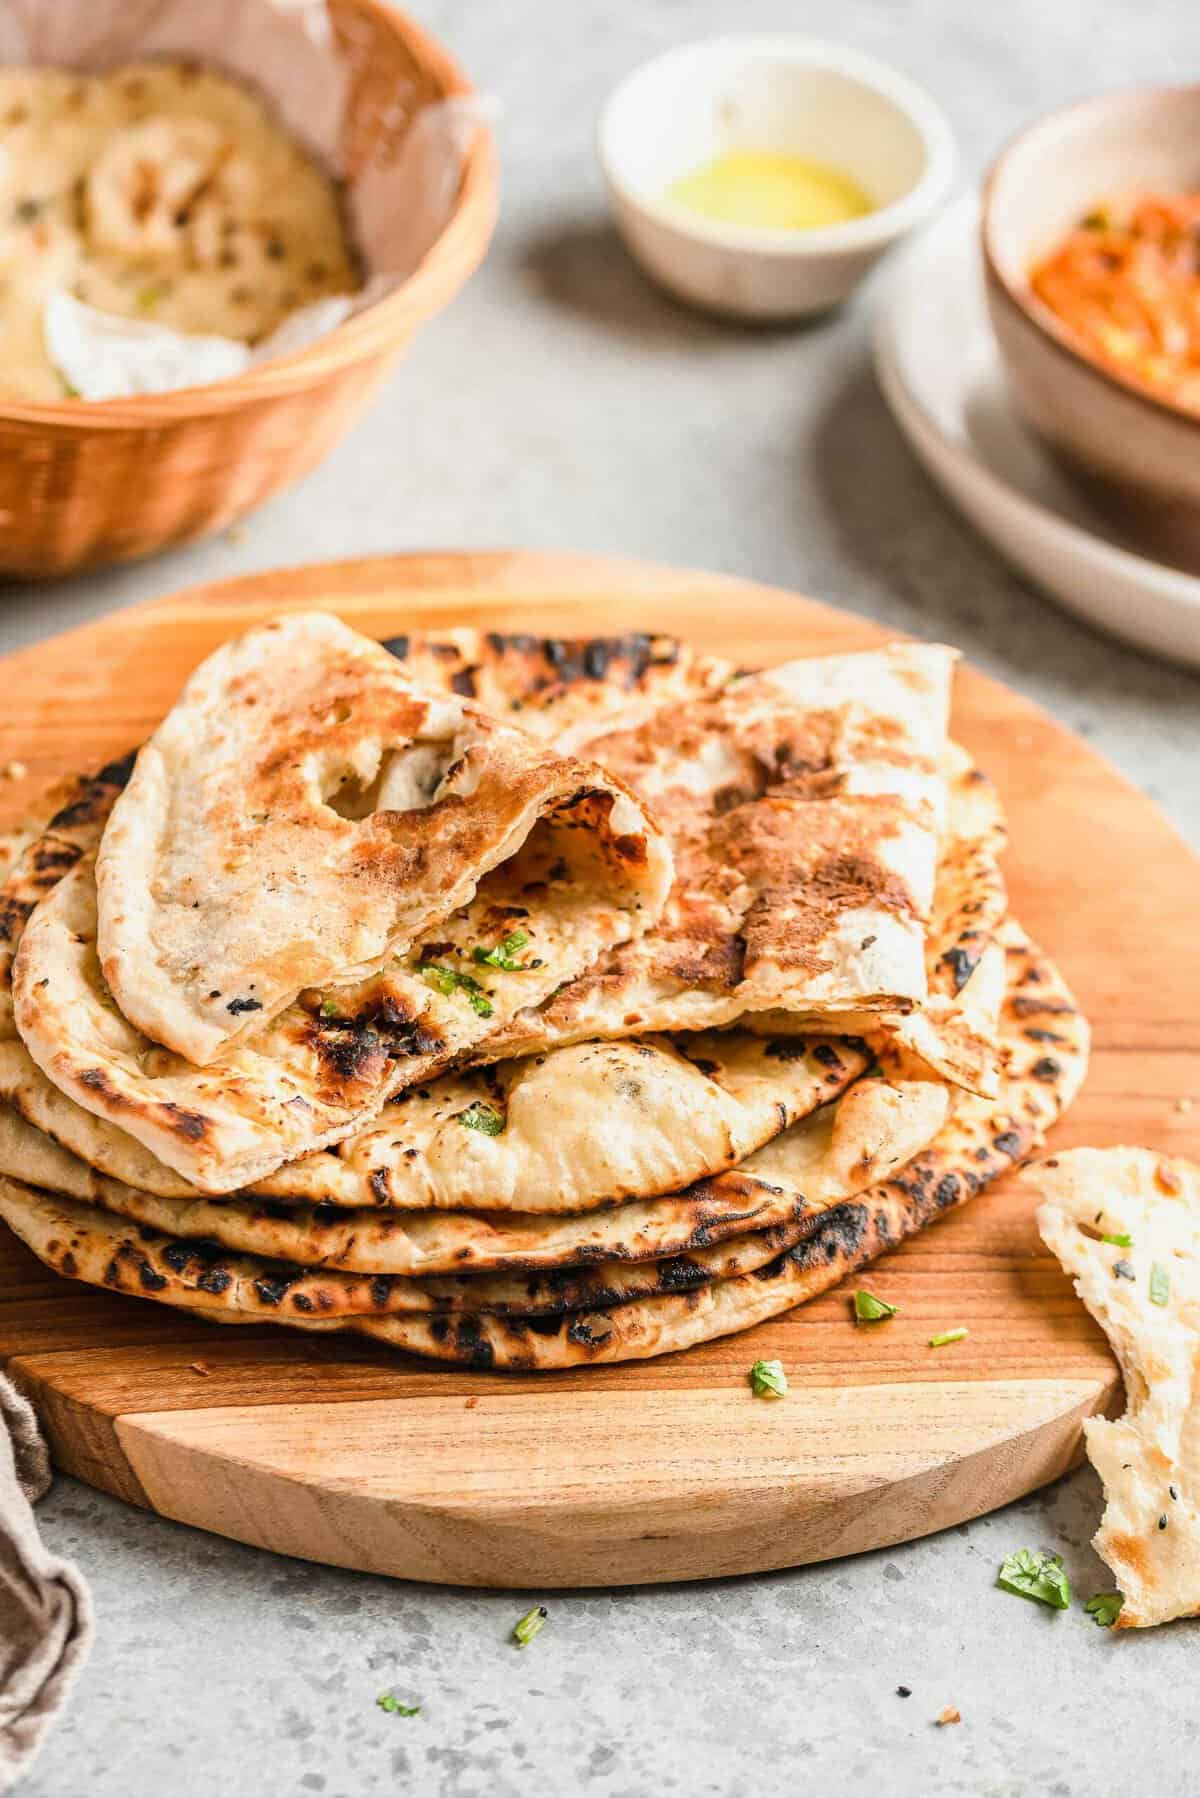 Round pieces of naan are in a stack on a wooden surface. 